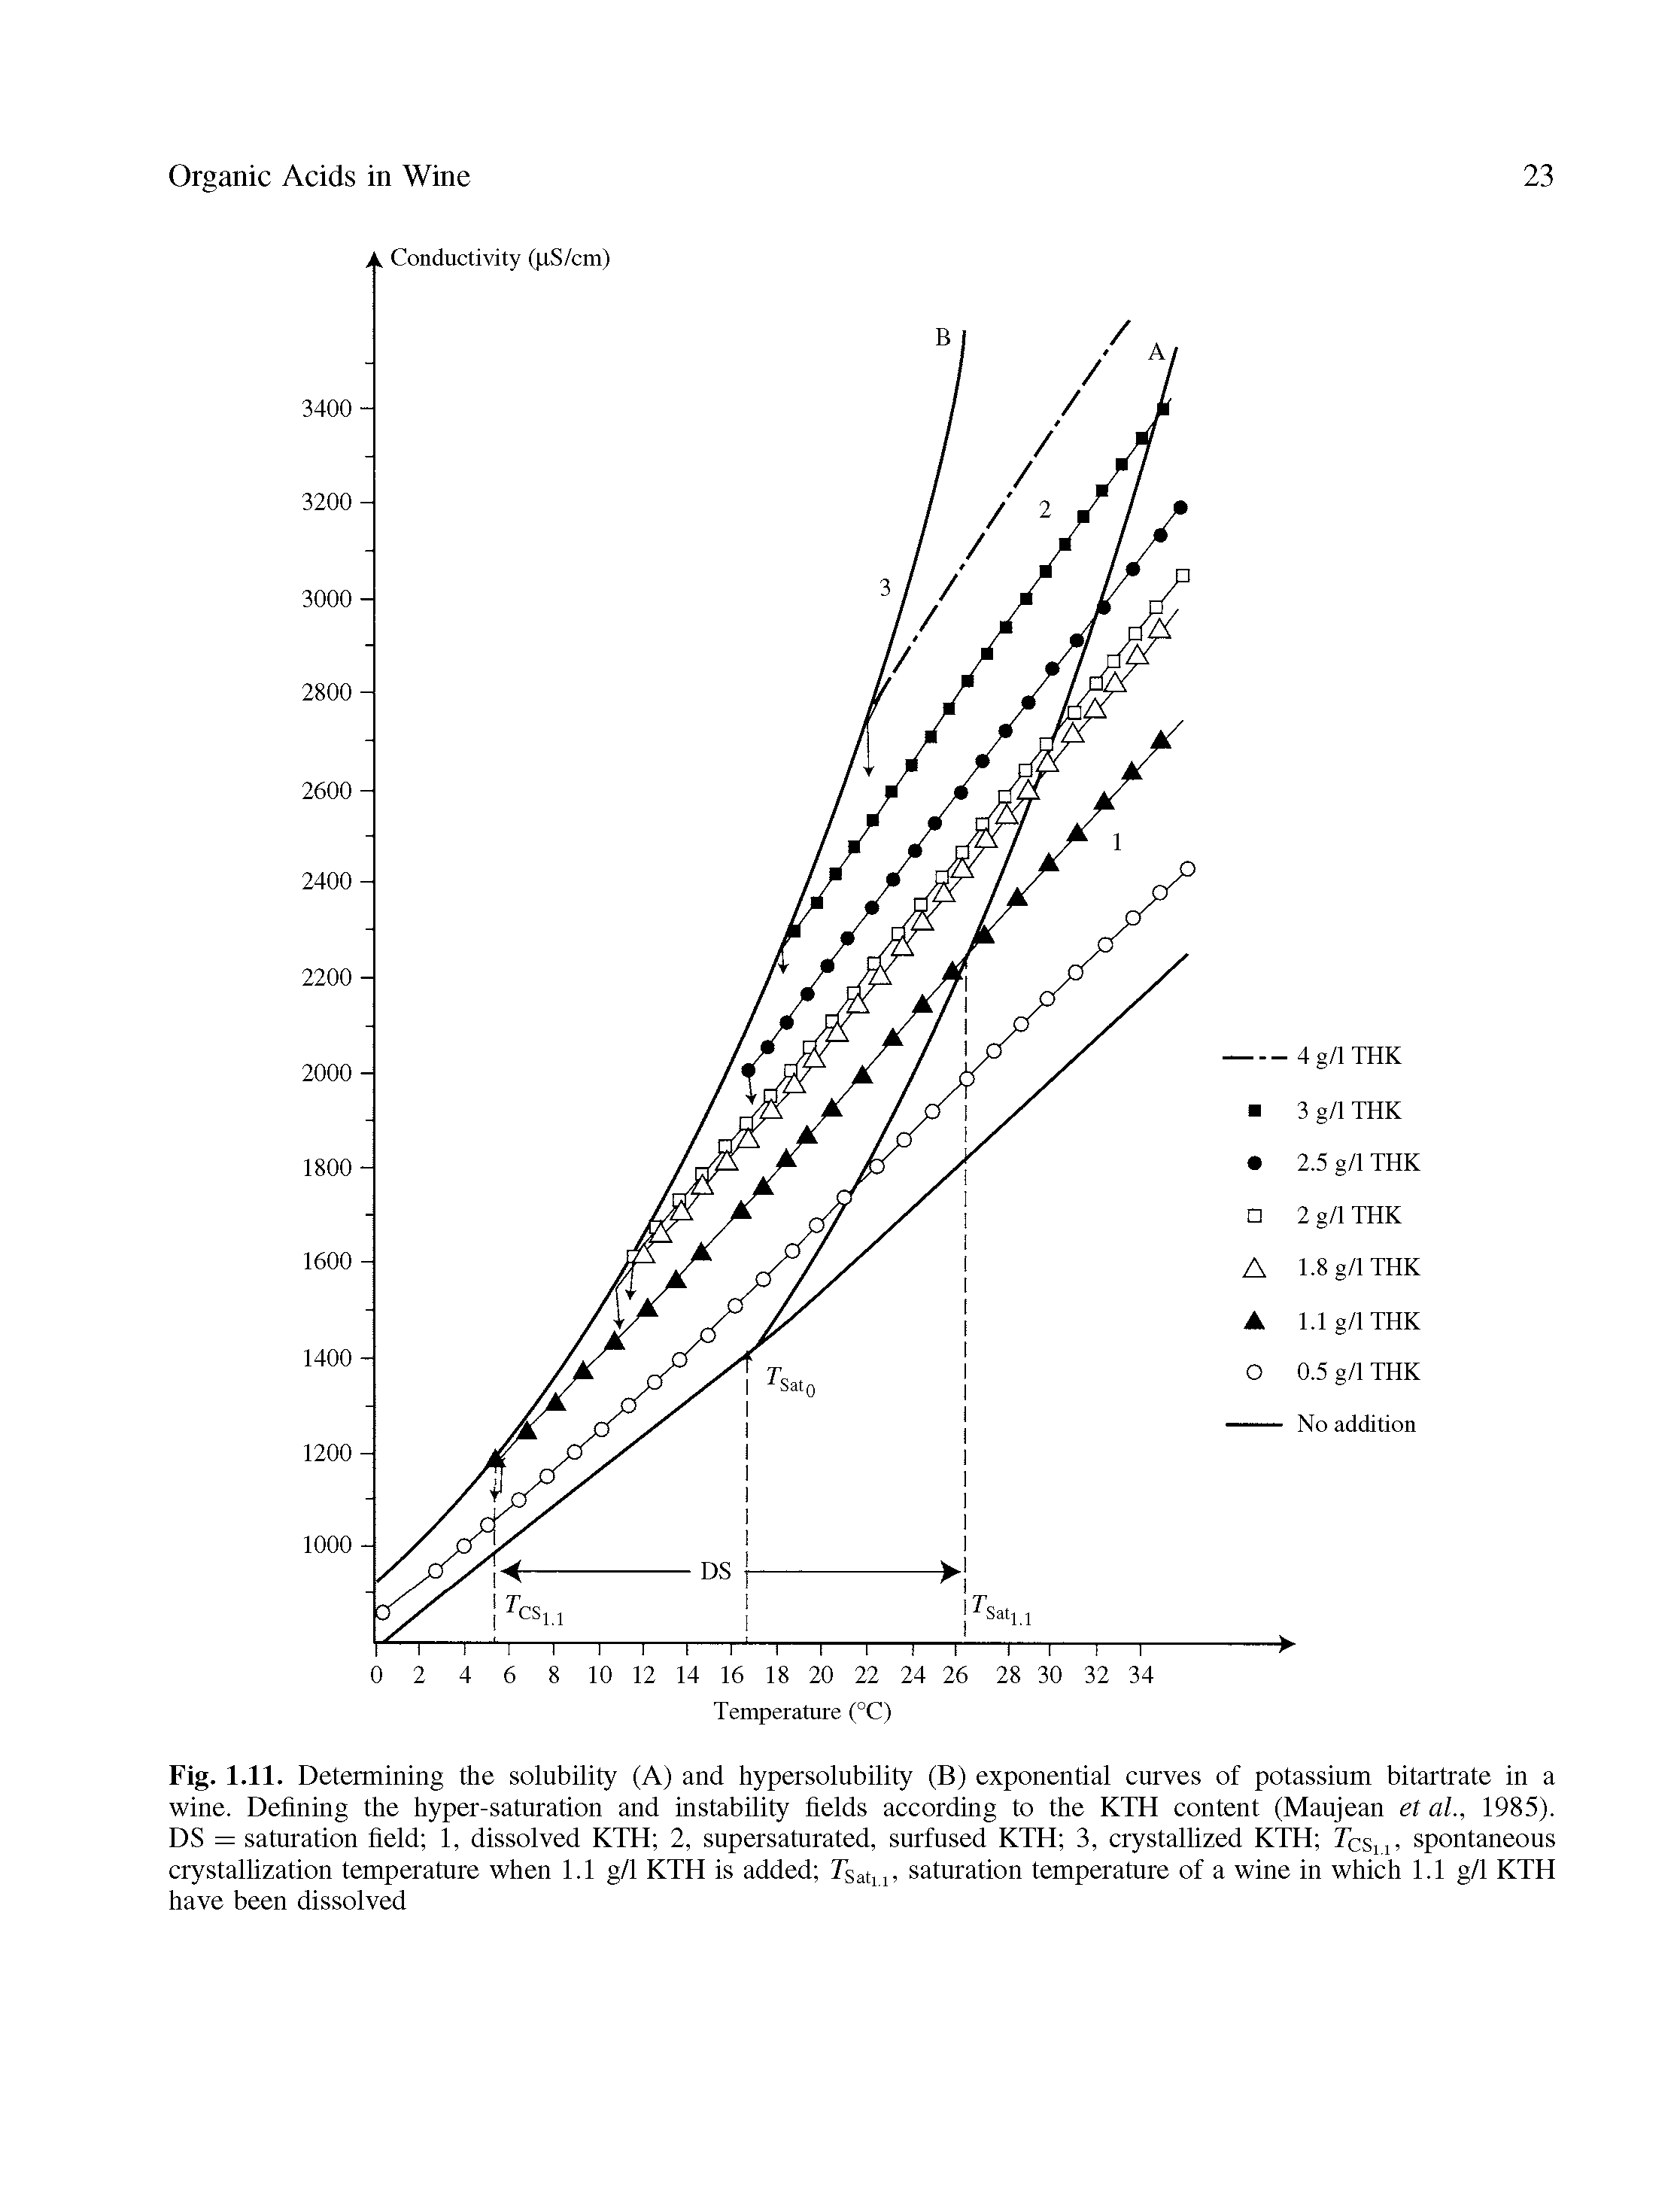 Fig. 1.11. Determining the solubility (A) and hypersolubility (B) exponential curves of potassium bitartrate in a wine. Defining the hyper-saturation and instability fields according to the KTH content (Maujean et al, 1985). DS = saturation field 1, dissolved KTH 2, supersaturated, surfused KTH 3, crystallized KTH rcs , spontaneous crystallization temperature when 1.1 g/1 KTH is added rsat , saturation temperature of a wine in which 1.1 g/1 KTH have been dissolved...